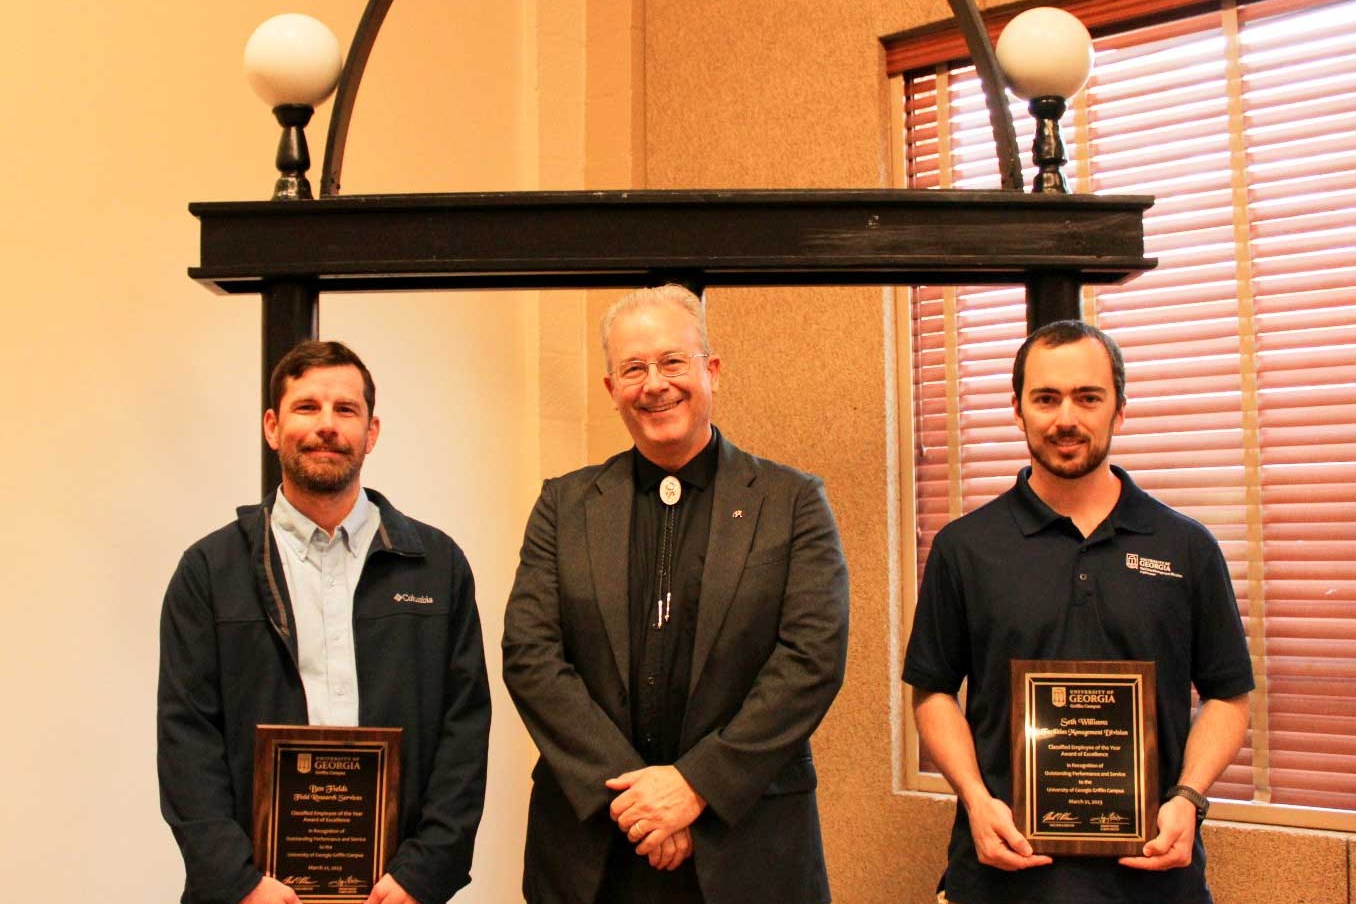 Jeffrey Dean (center), assistant provost and campus director for UGA-Griffin, with the 2023 Classified Employee Award recipients, Ben Fields (left) of Field Research Services and Seth Williams of Facilities Management.